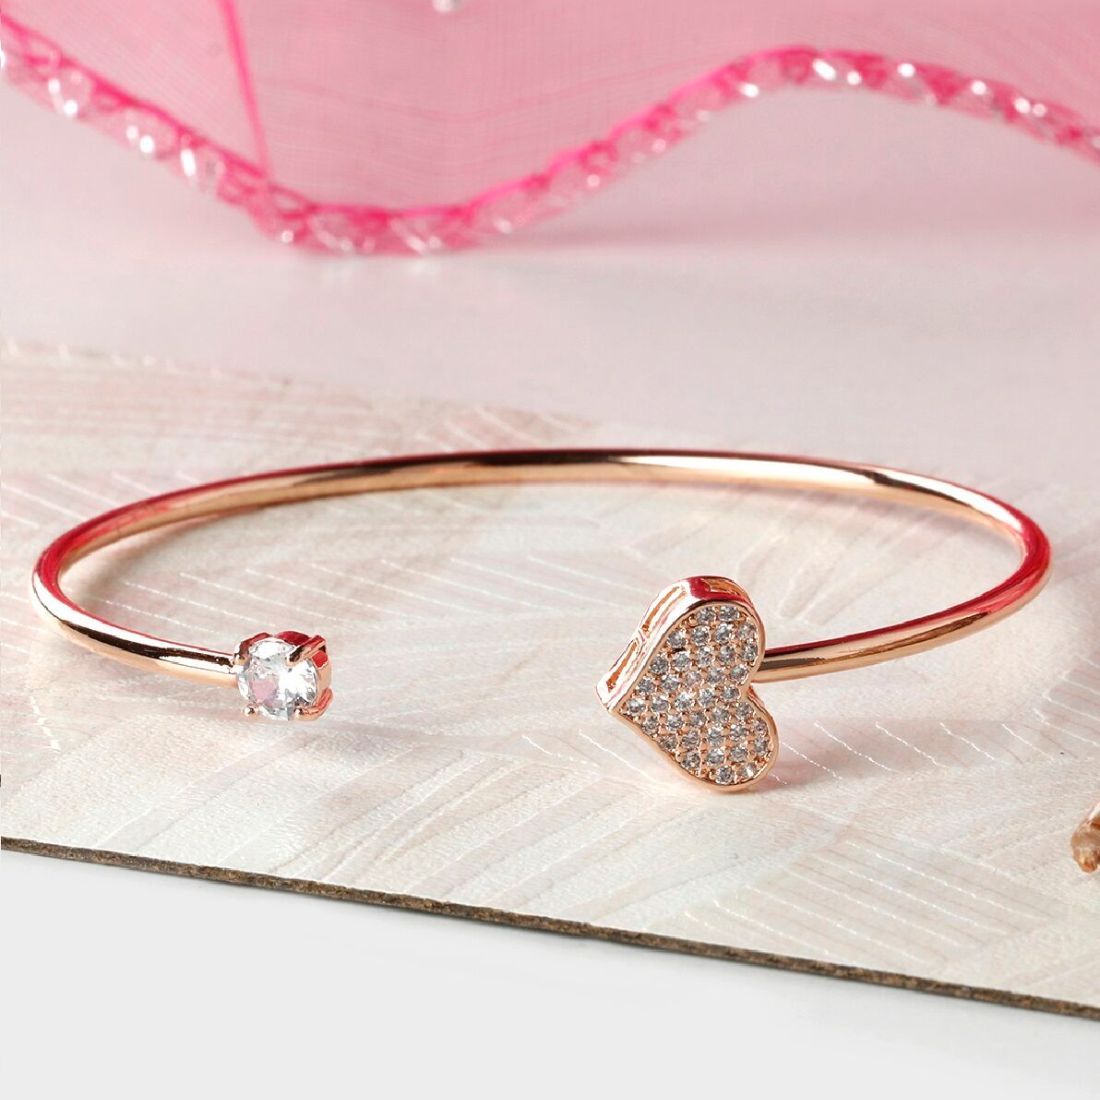 Share more than 83 rose gold handcuff bracelet